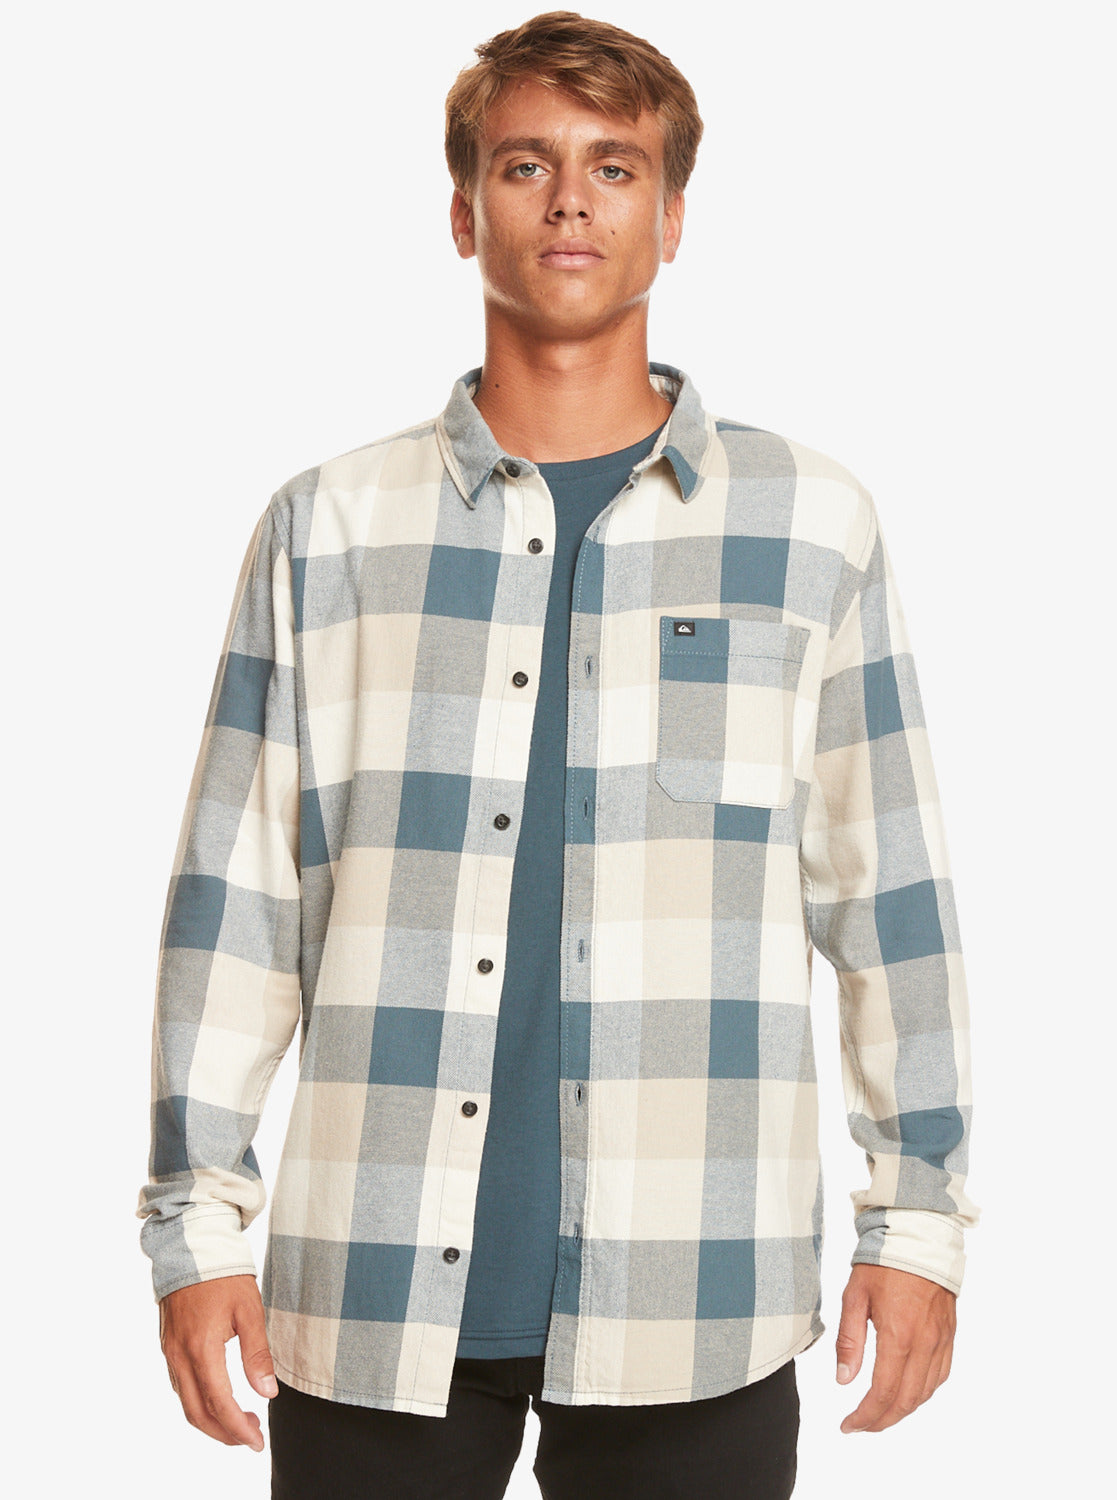 Quiksilver Motherfly Long Sleeve Button Up- 2 Colors!